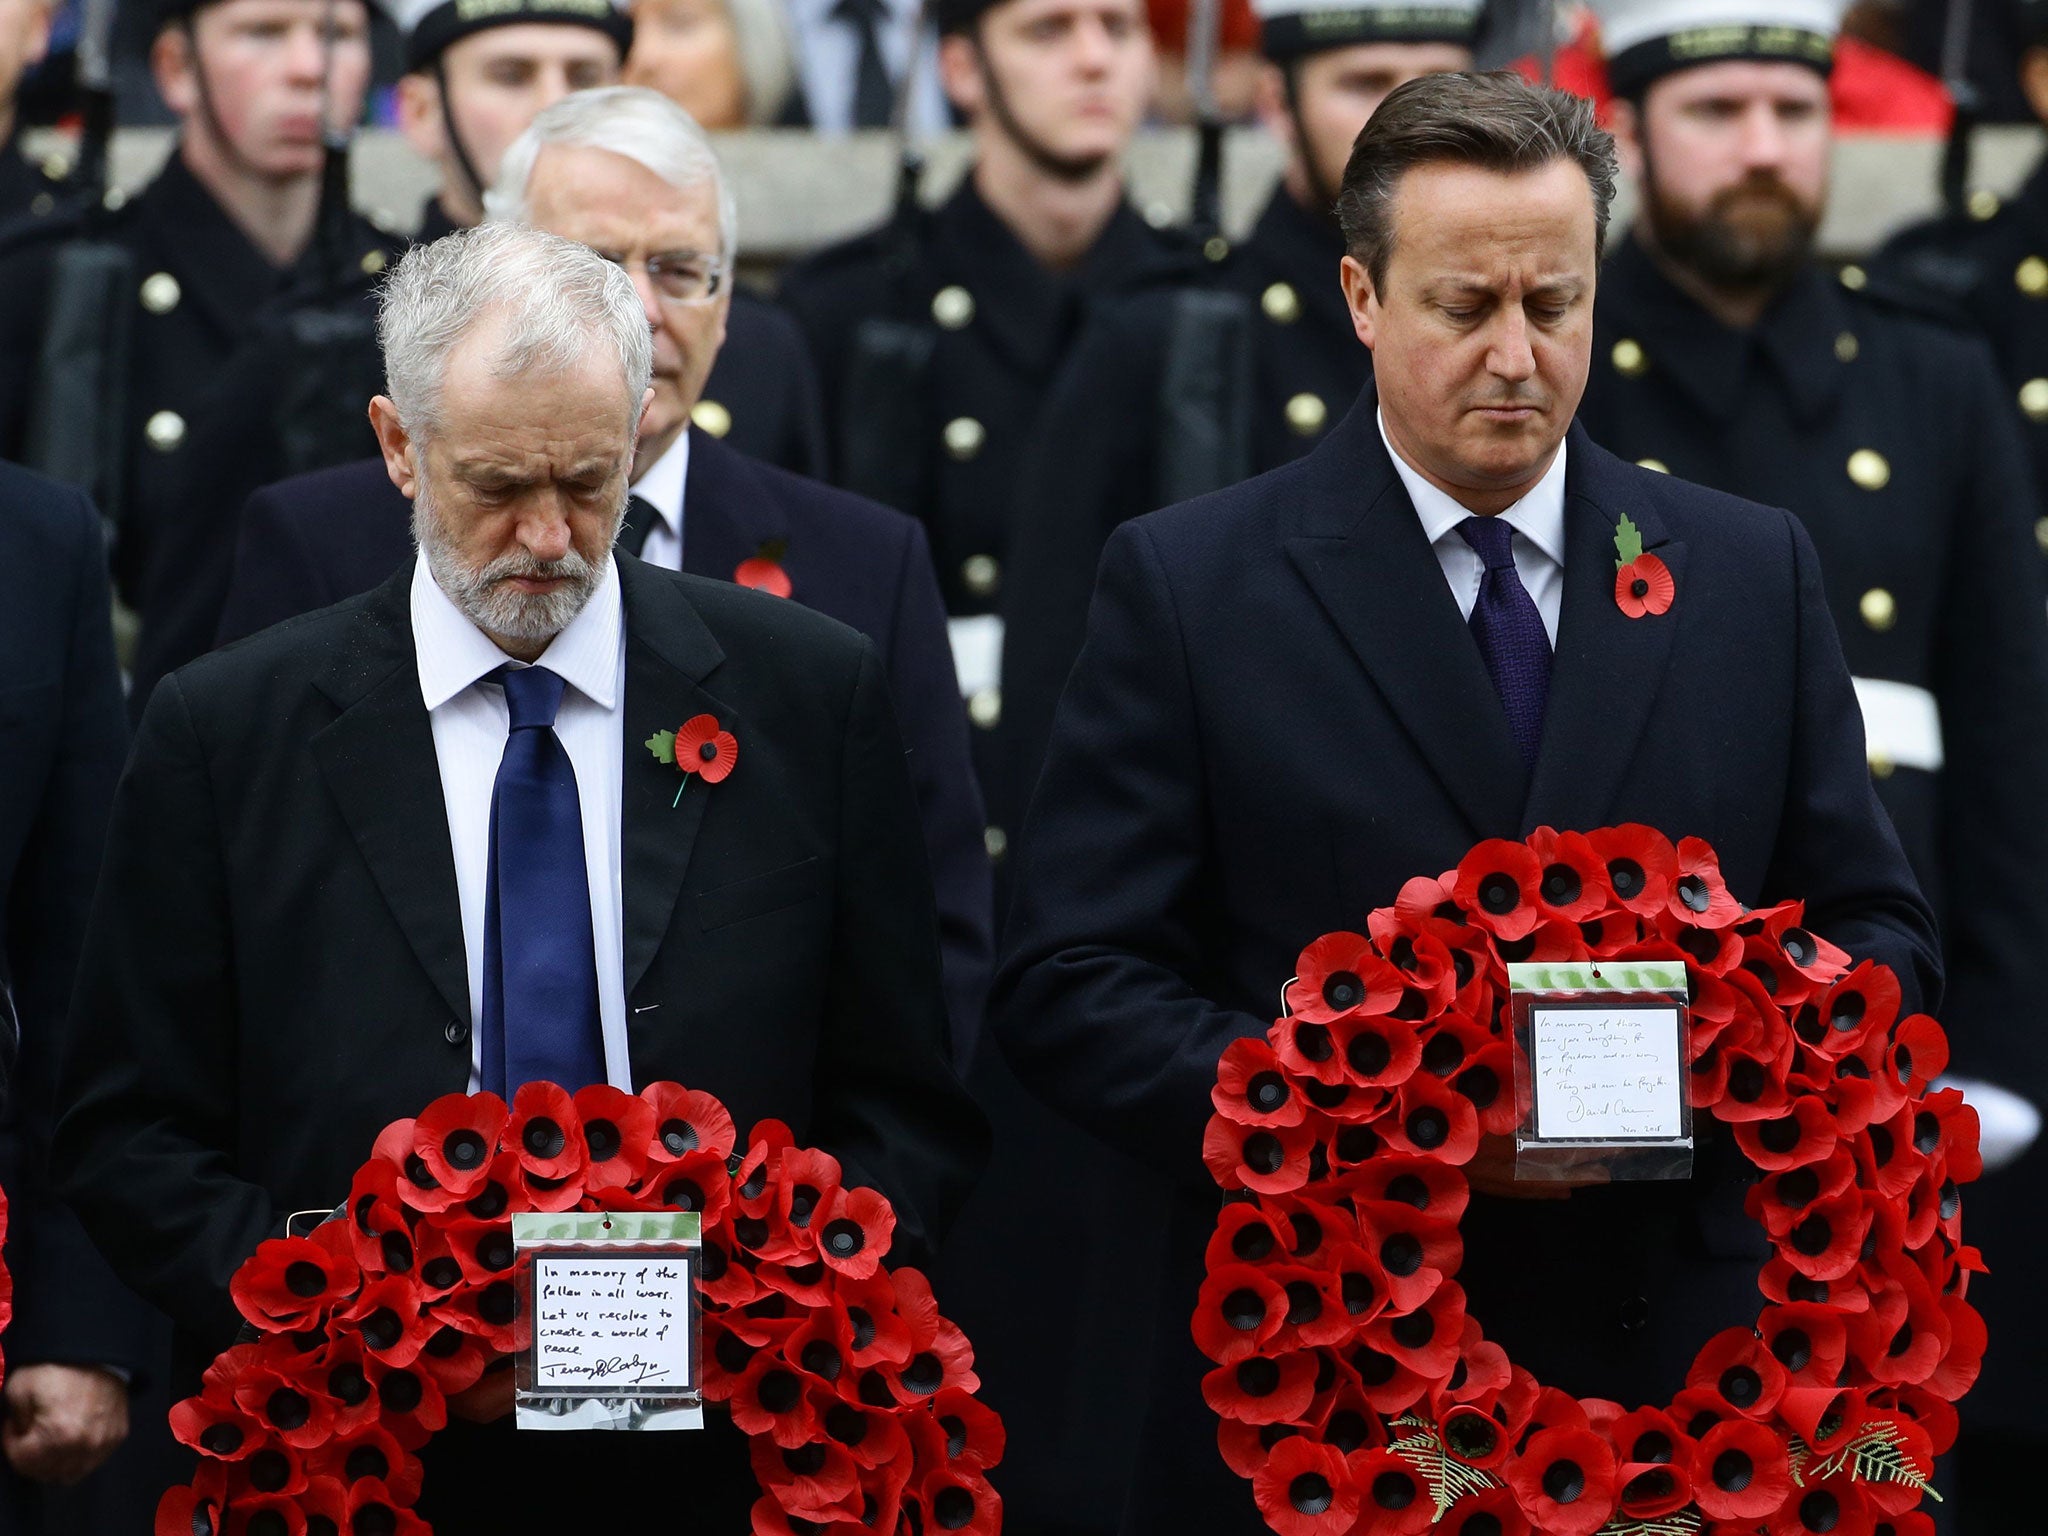 Labour party leader Jeremy Corbyn (left) and Prime Minister David Cameron wait to lay wreaths during the annual Remembrance Sunday service at the Cenotaph memorial in Whitehall, central London